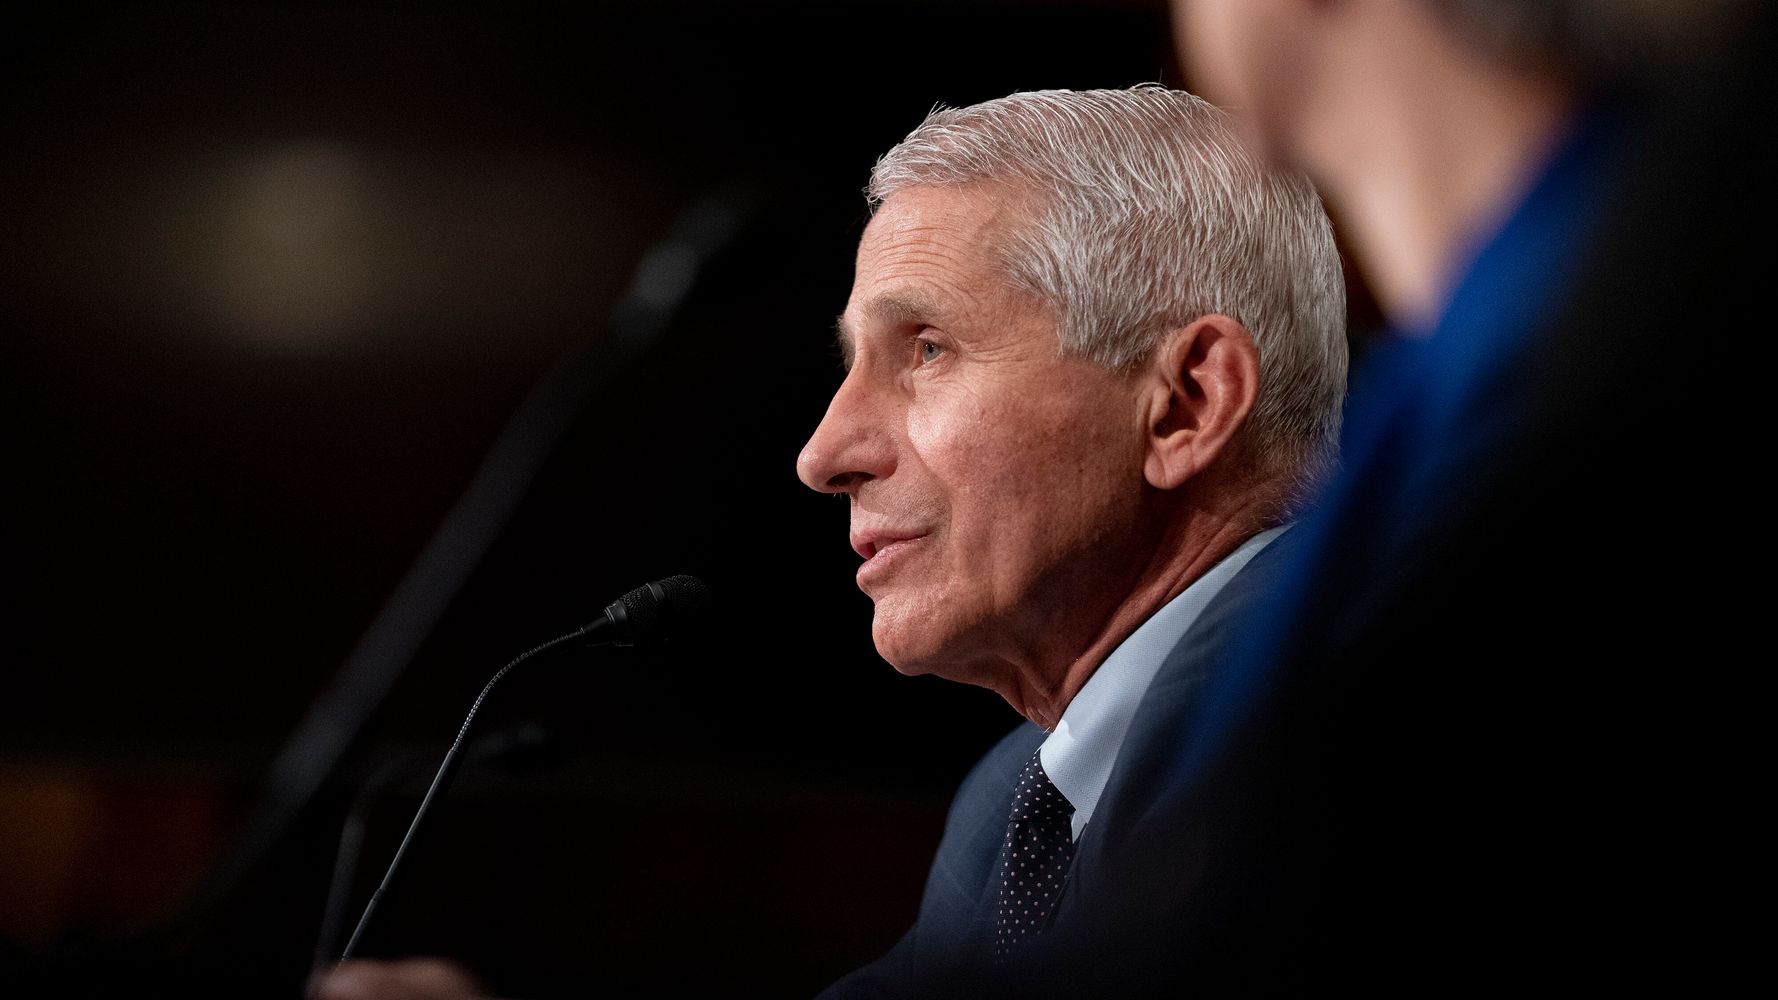 Fauci Joins Calls To Require COVID-19 Vaccines For Health Care Workers